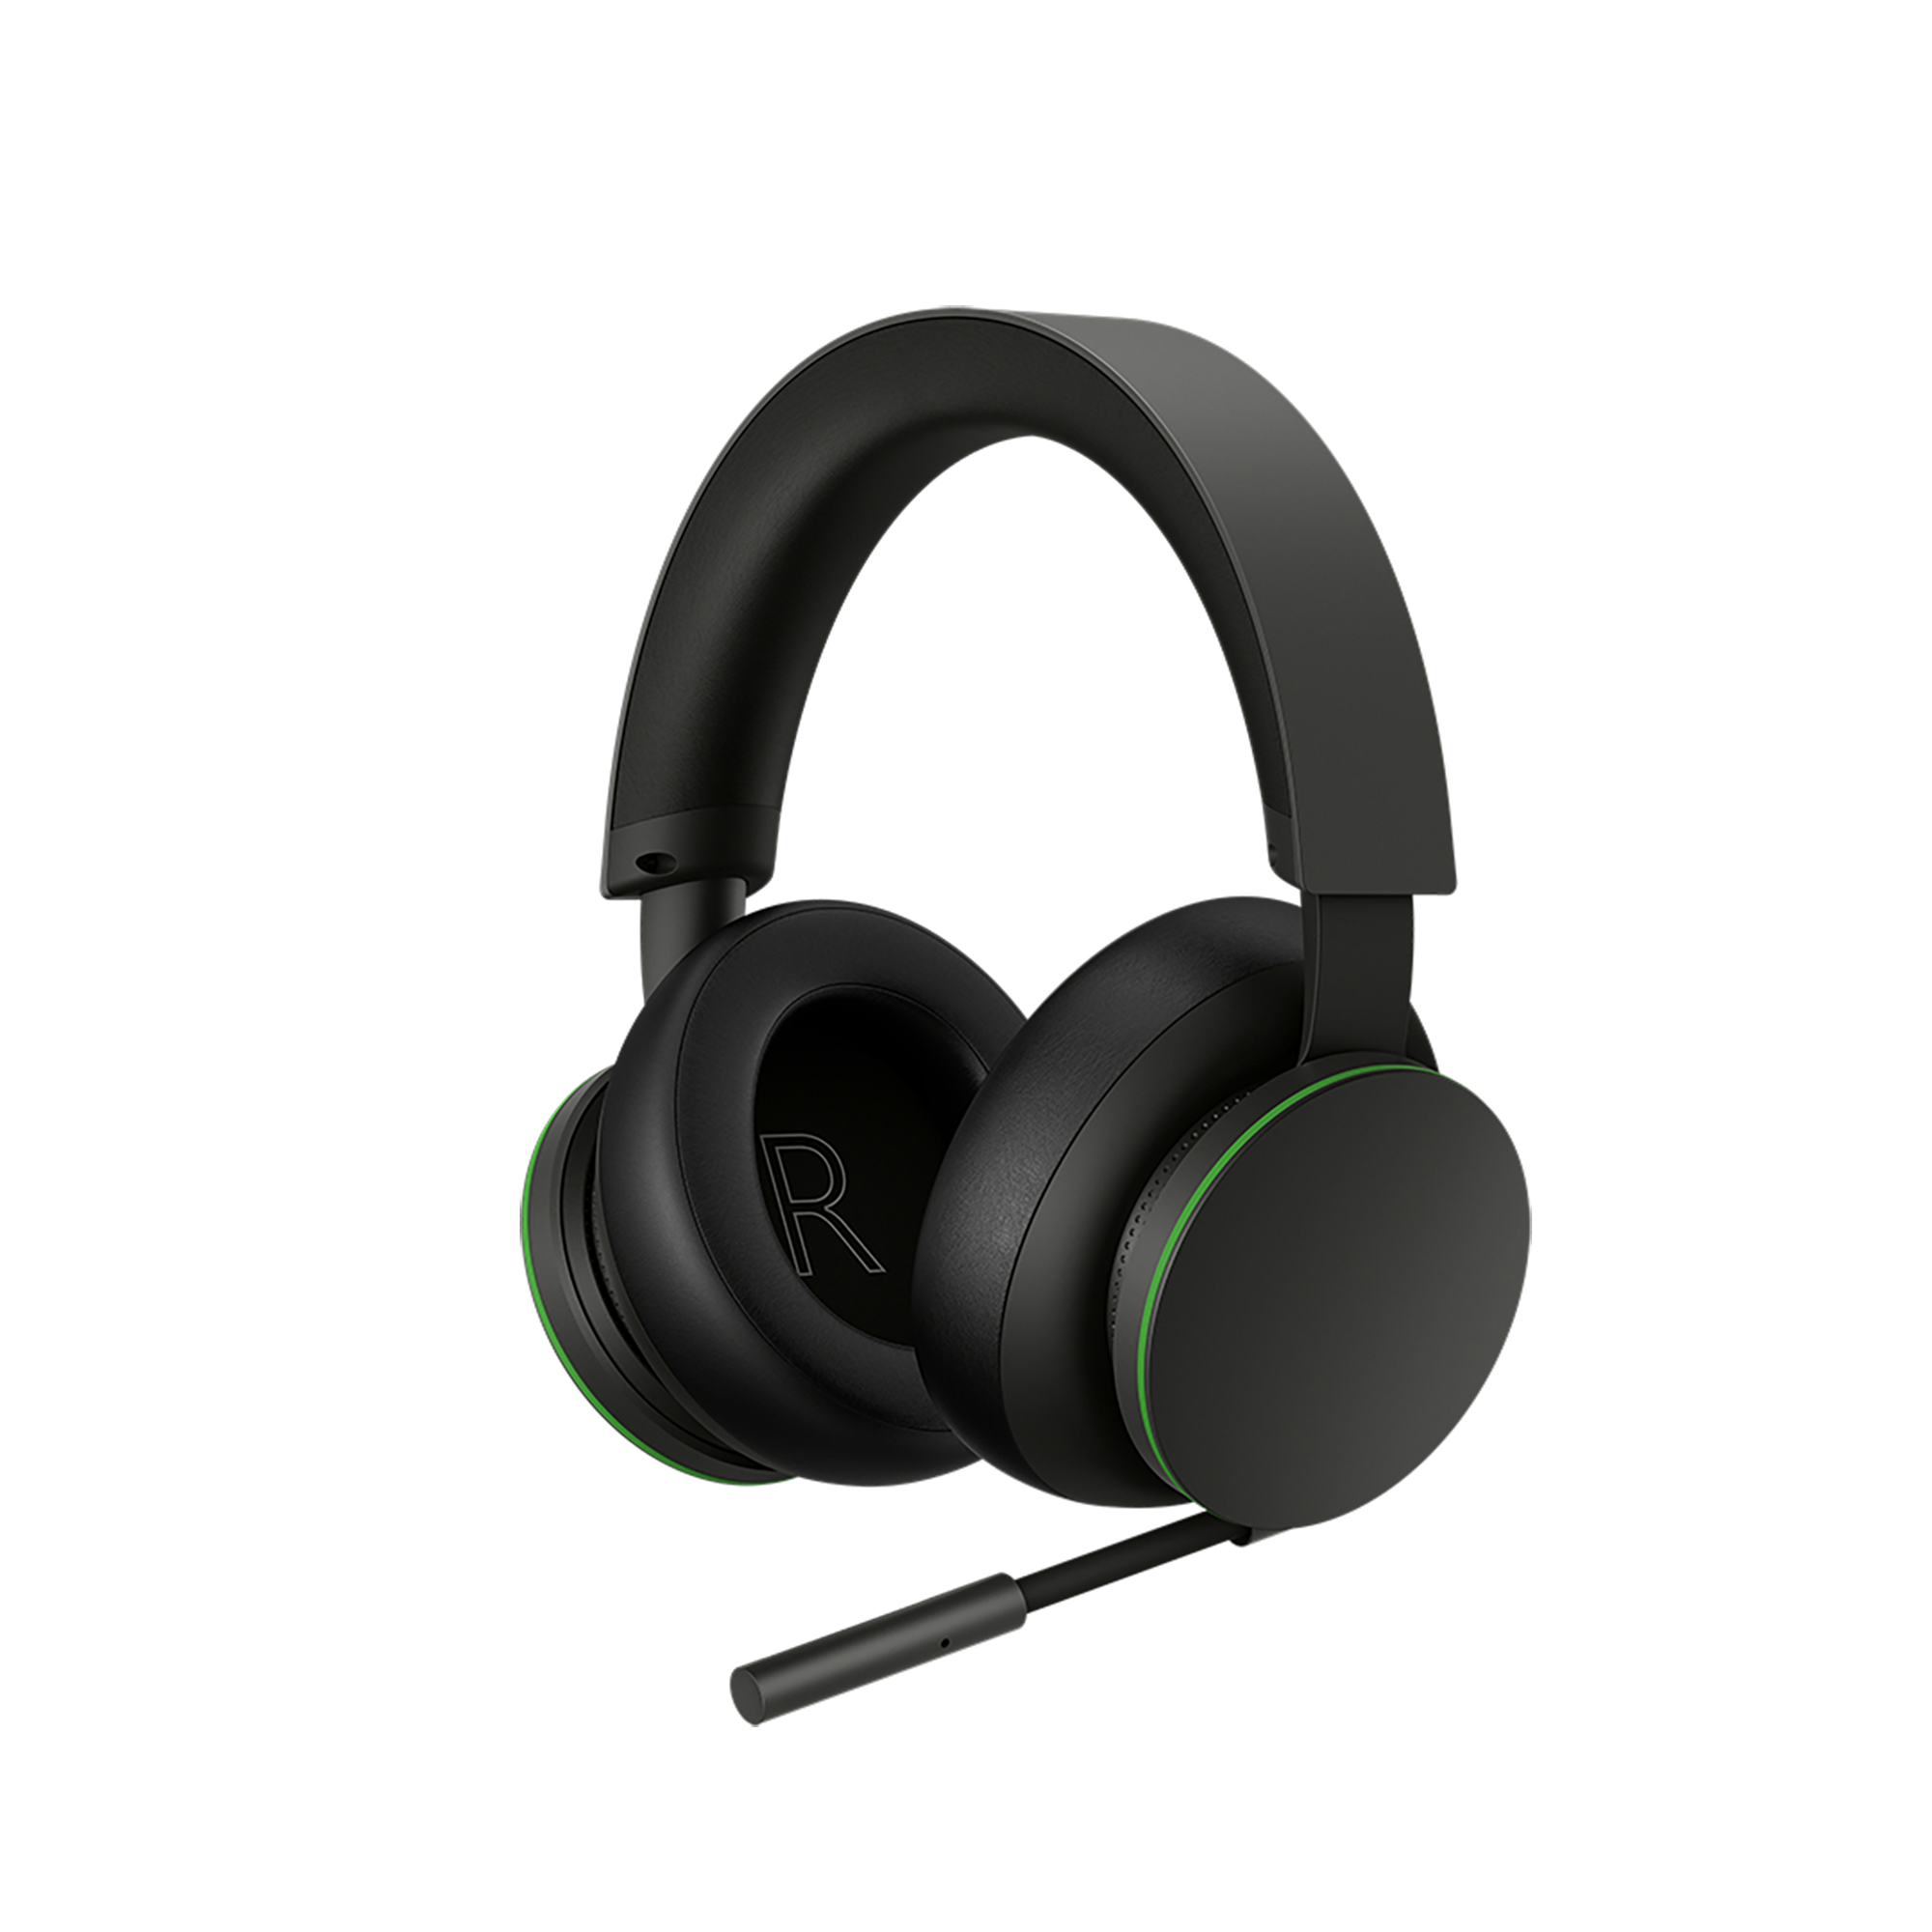 Microsoft Xbox Wireless Headset for Xbox Series X/S, Xbox One, and Windows 10 Devices - image 3 of 10